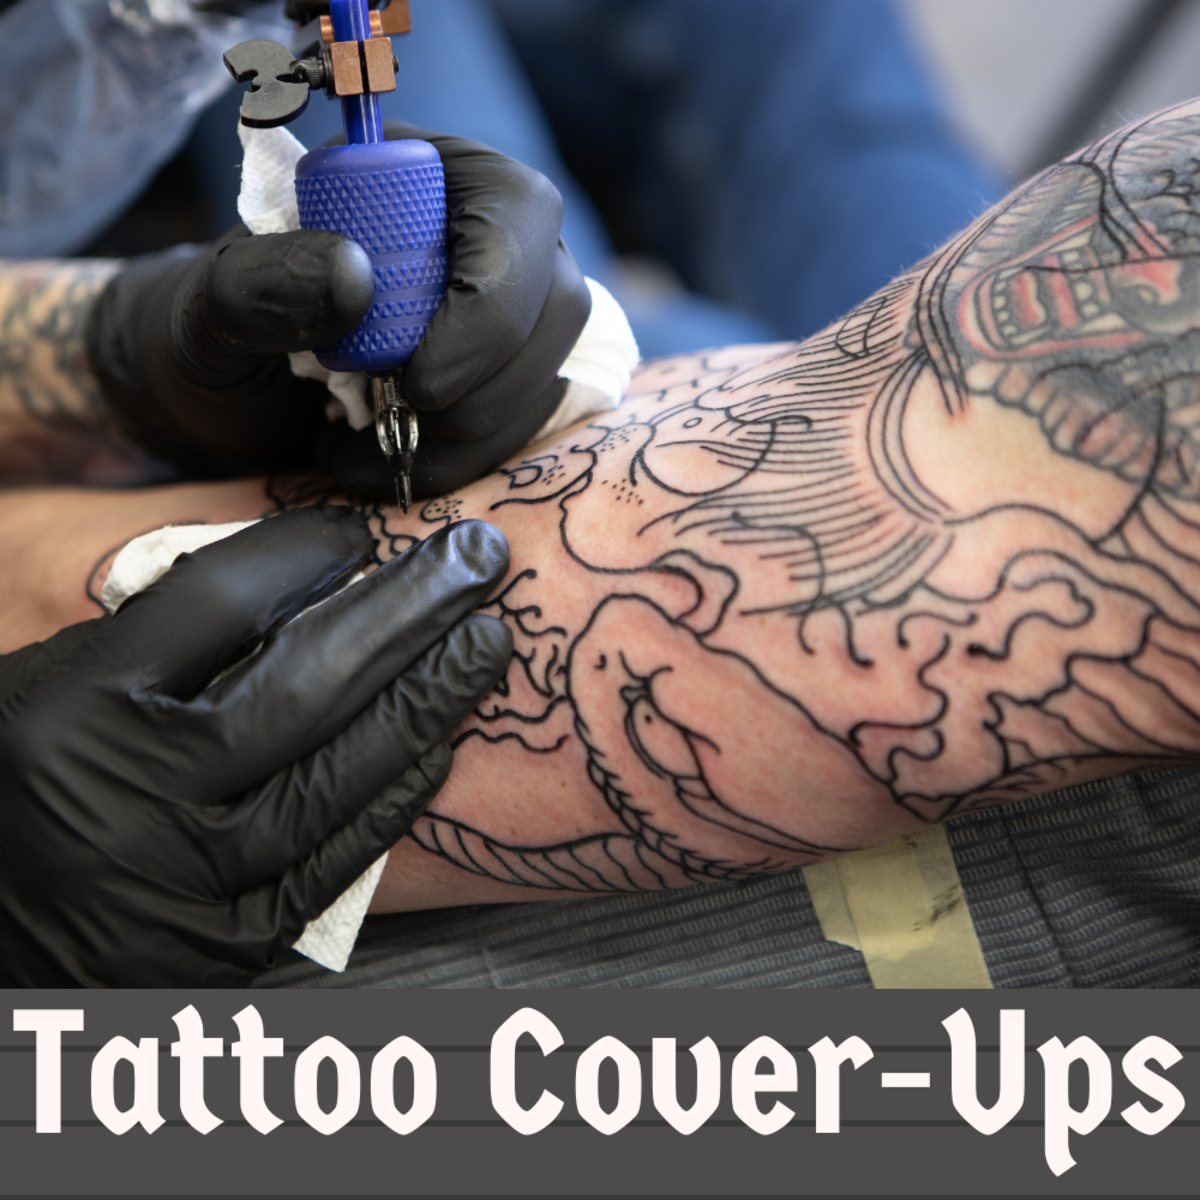 How to get over a bad tattoo